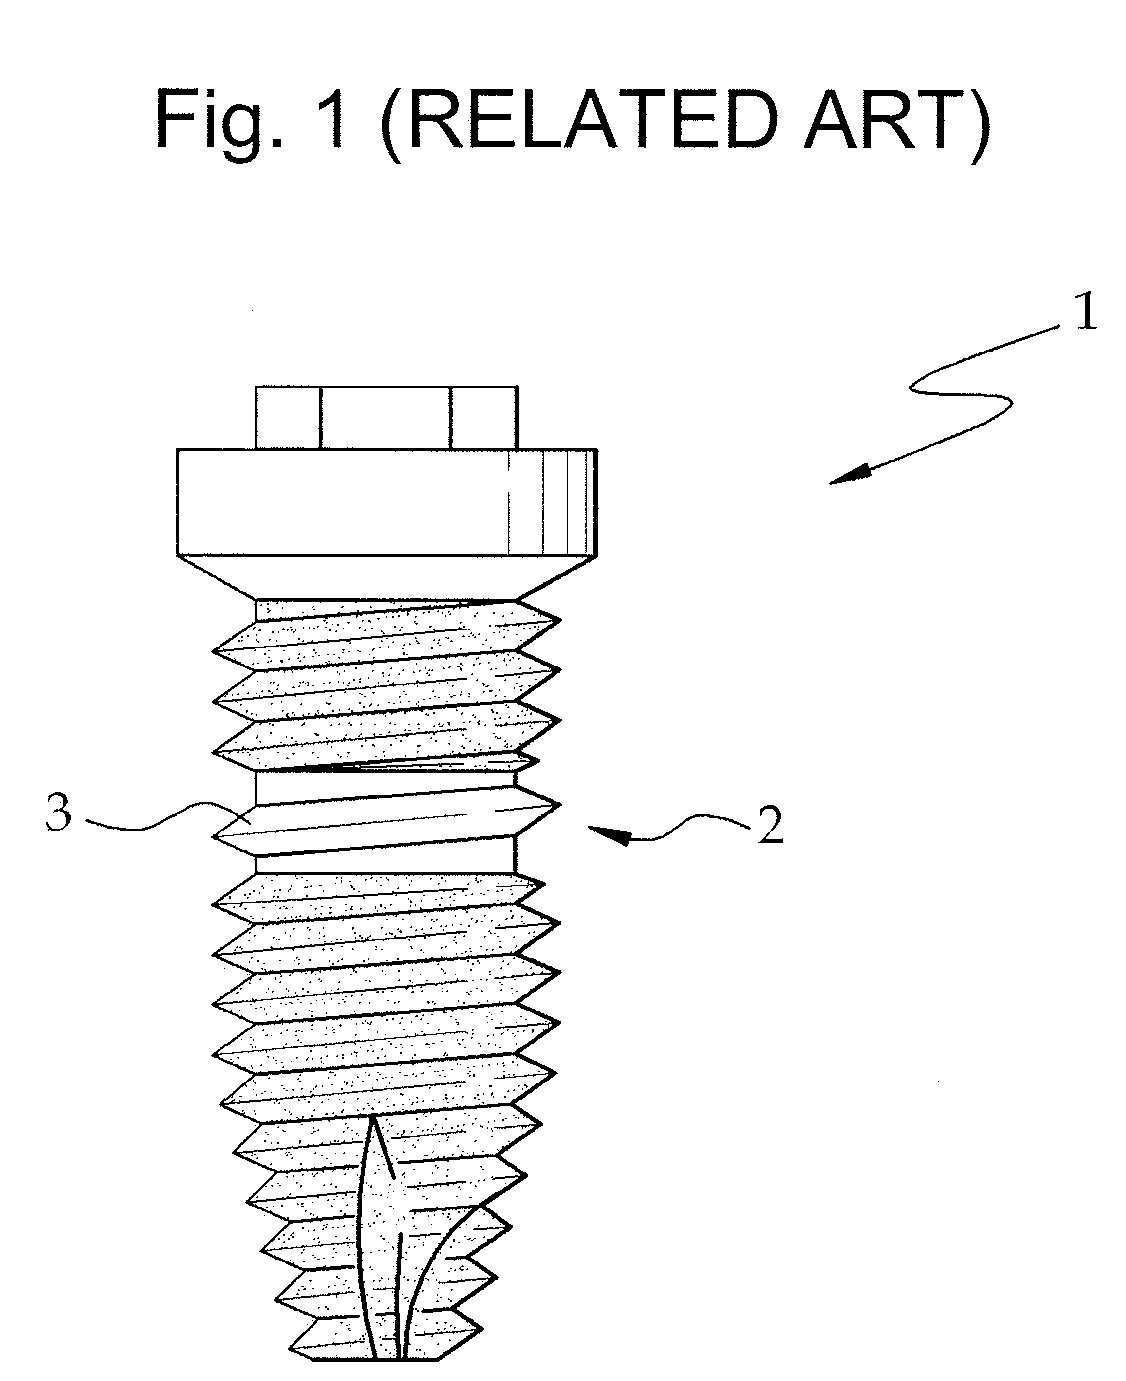 Fixture of dental implant and method of manufacturing the same